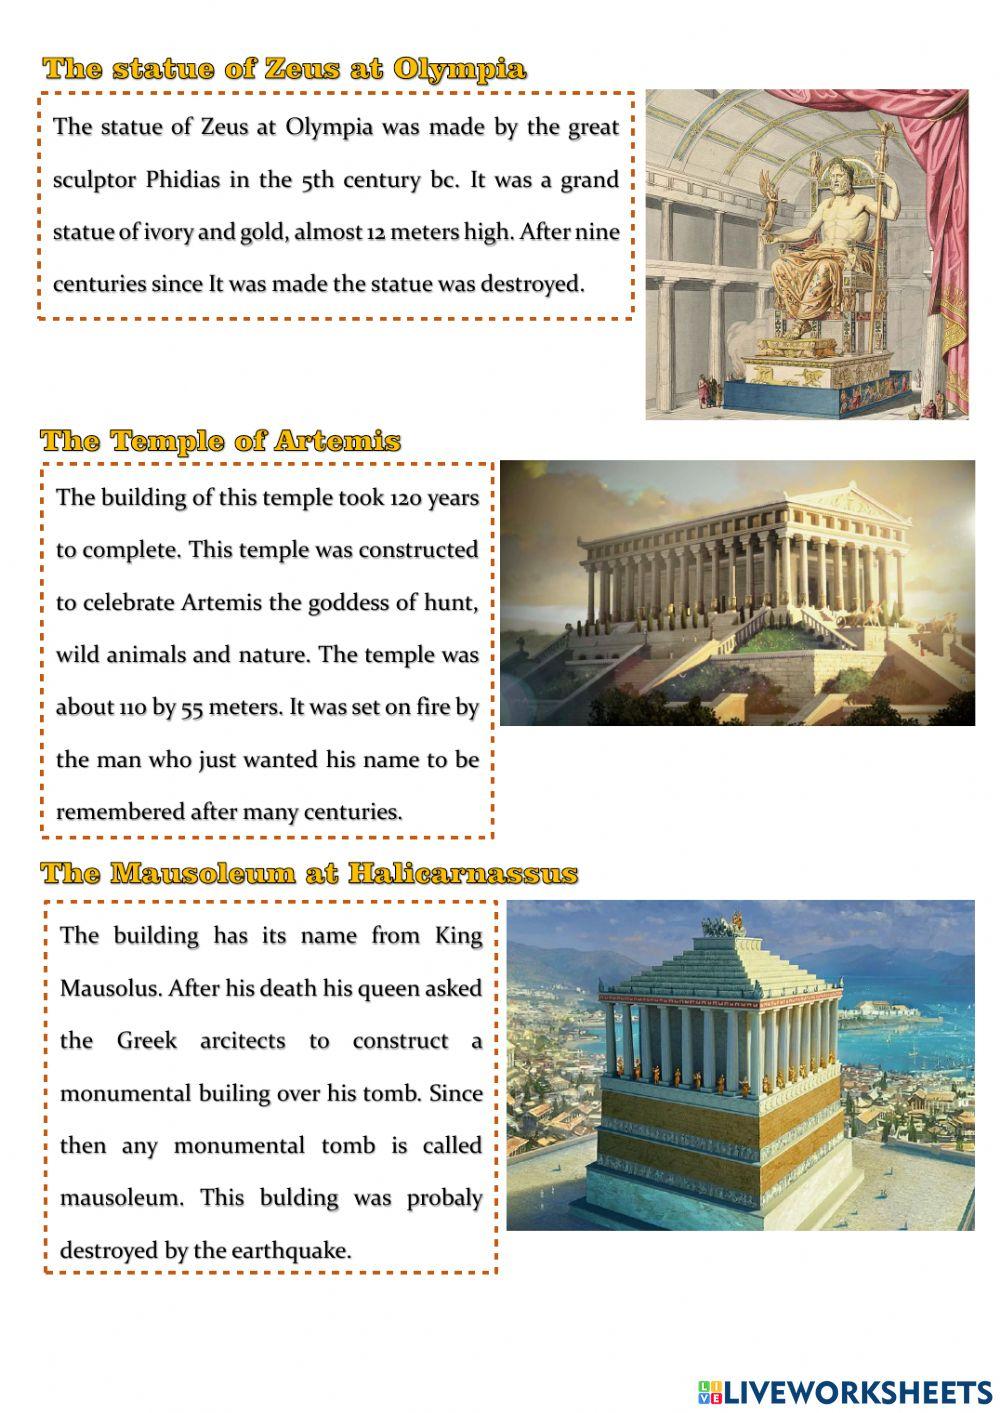 Seven Wonders of The Ancient World interactive worksheet | Live Worksheets